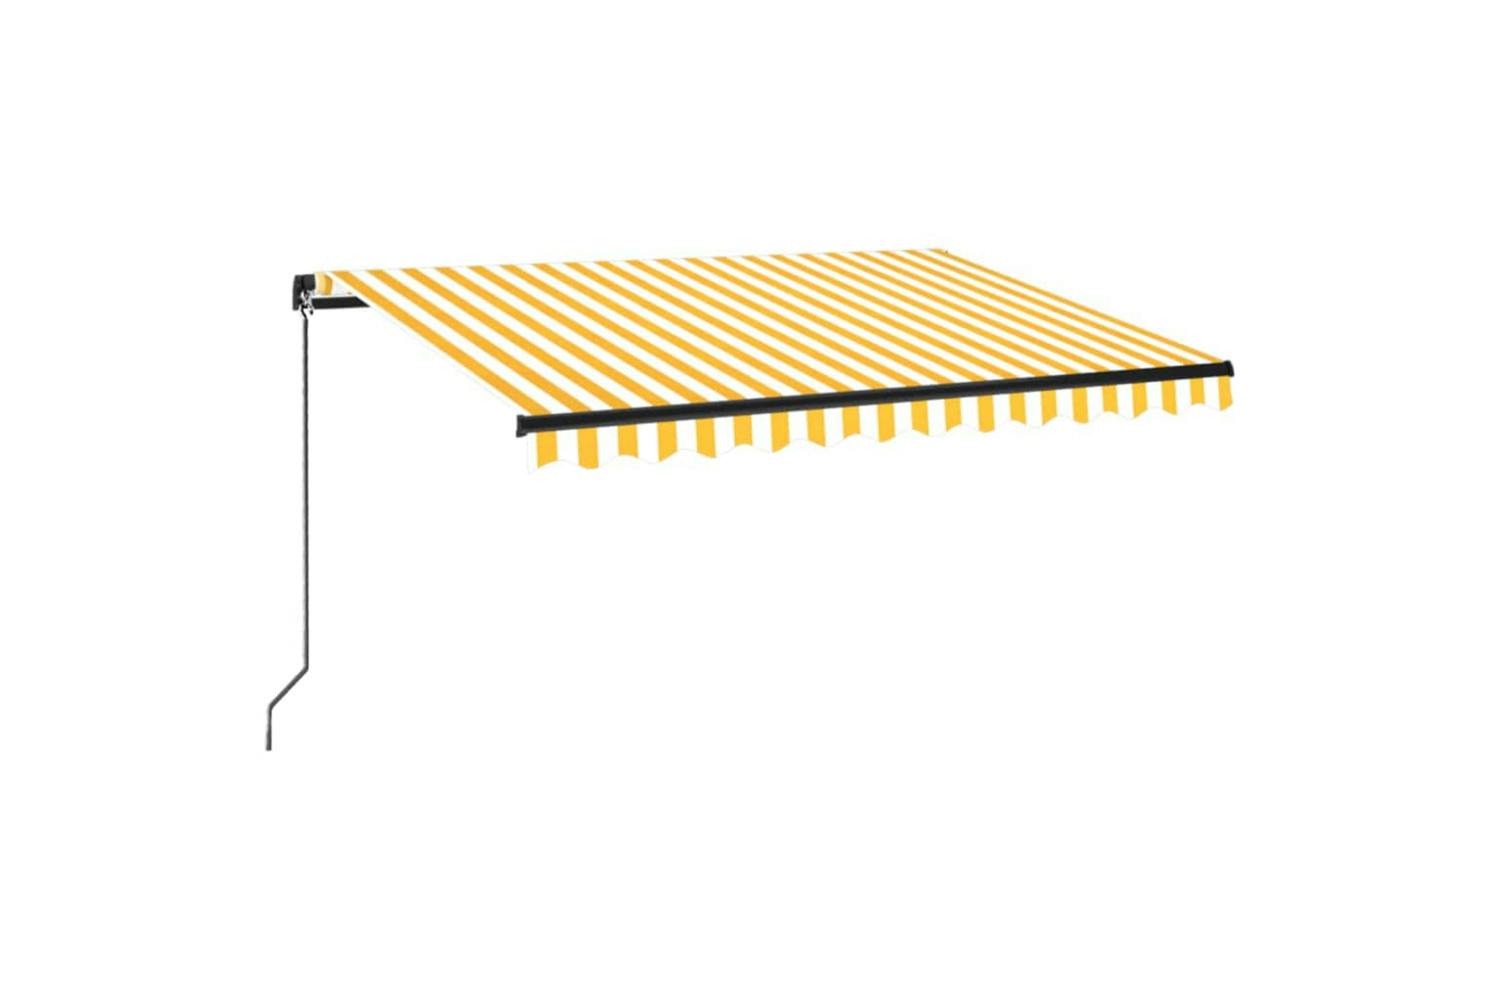 Vidaxl 3069078 Manual Retractable Awning 350x250 Cm Yellow And White